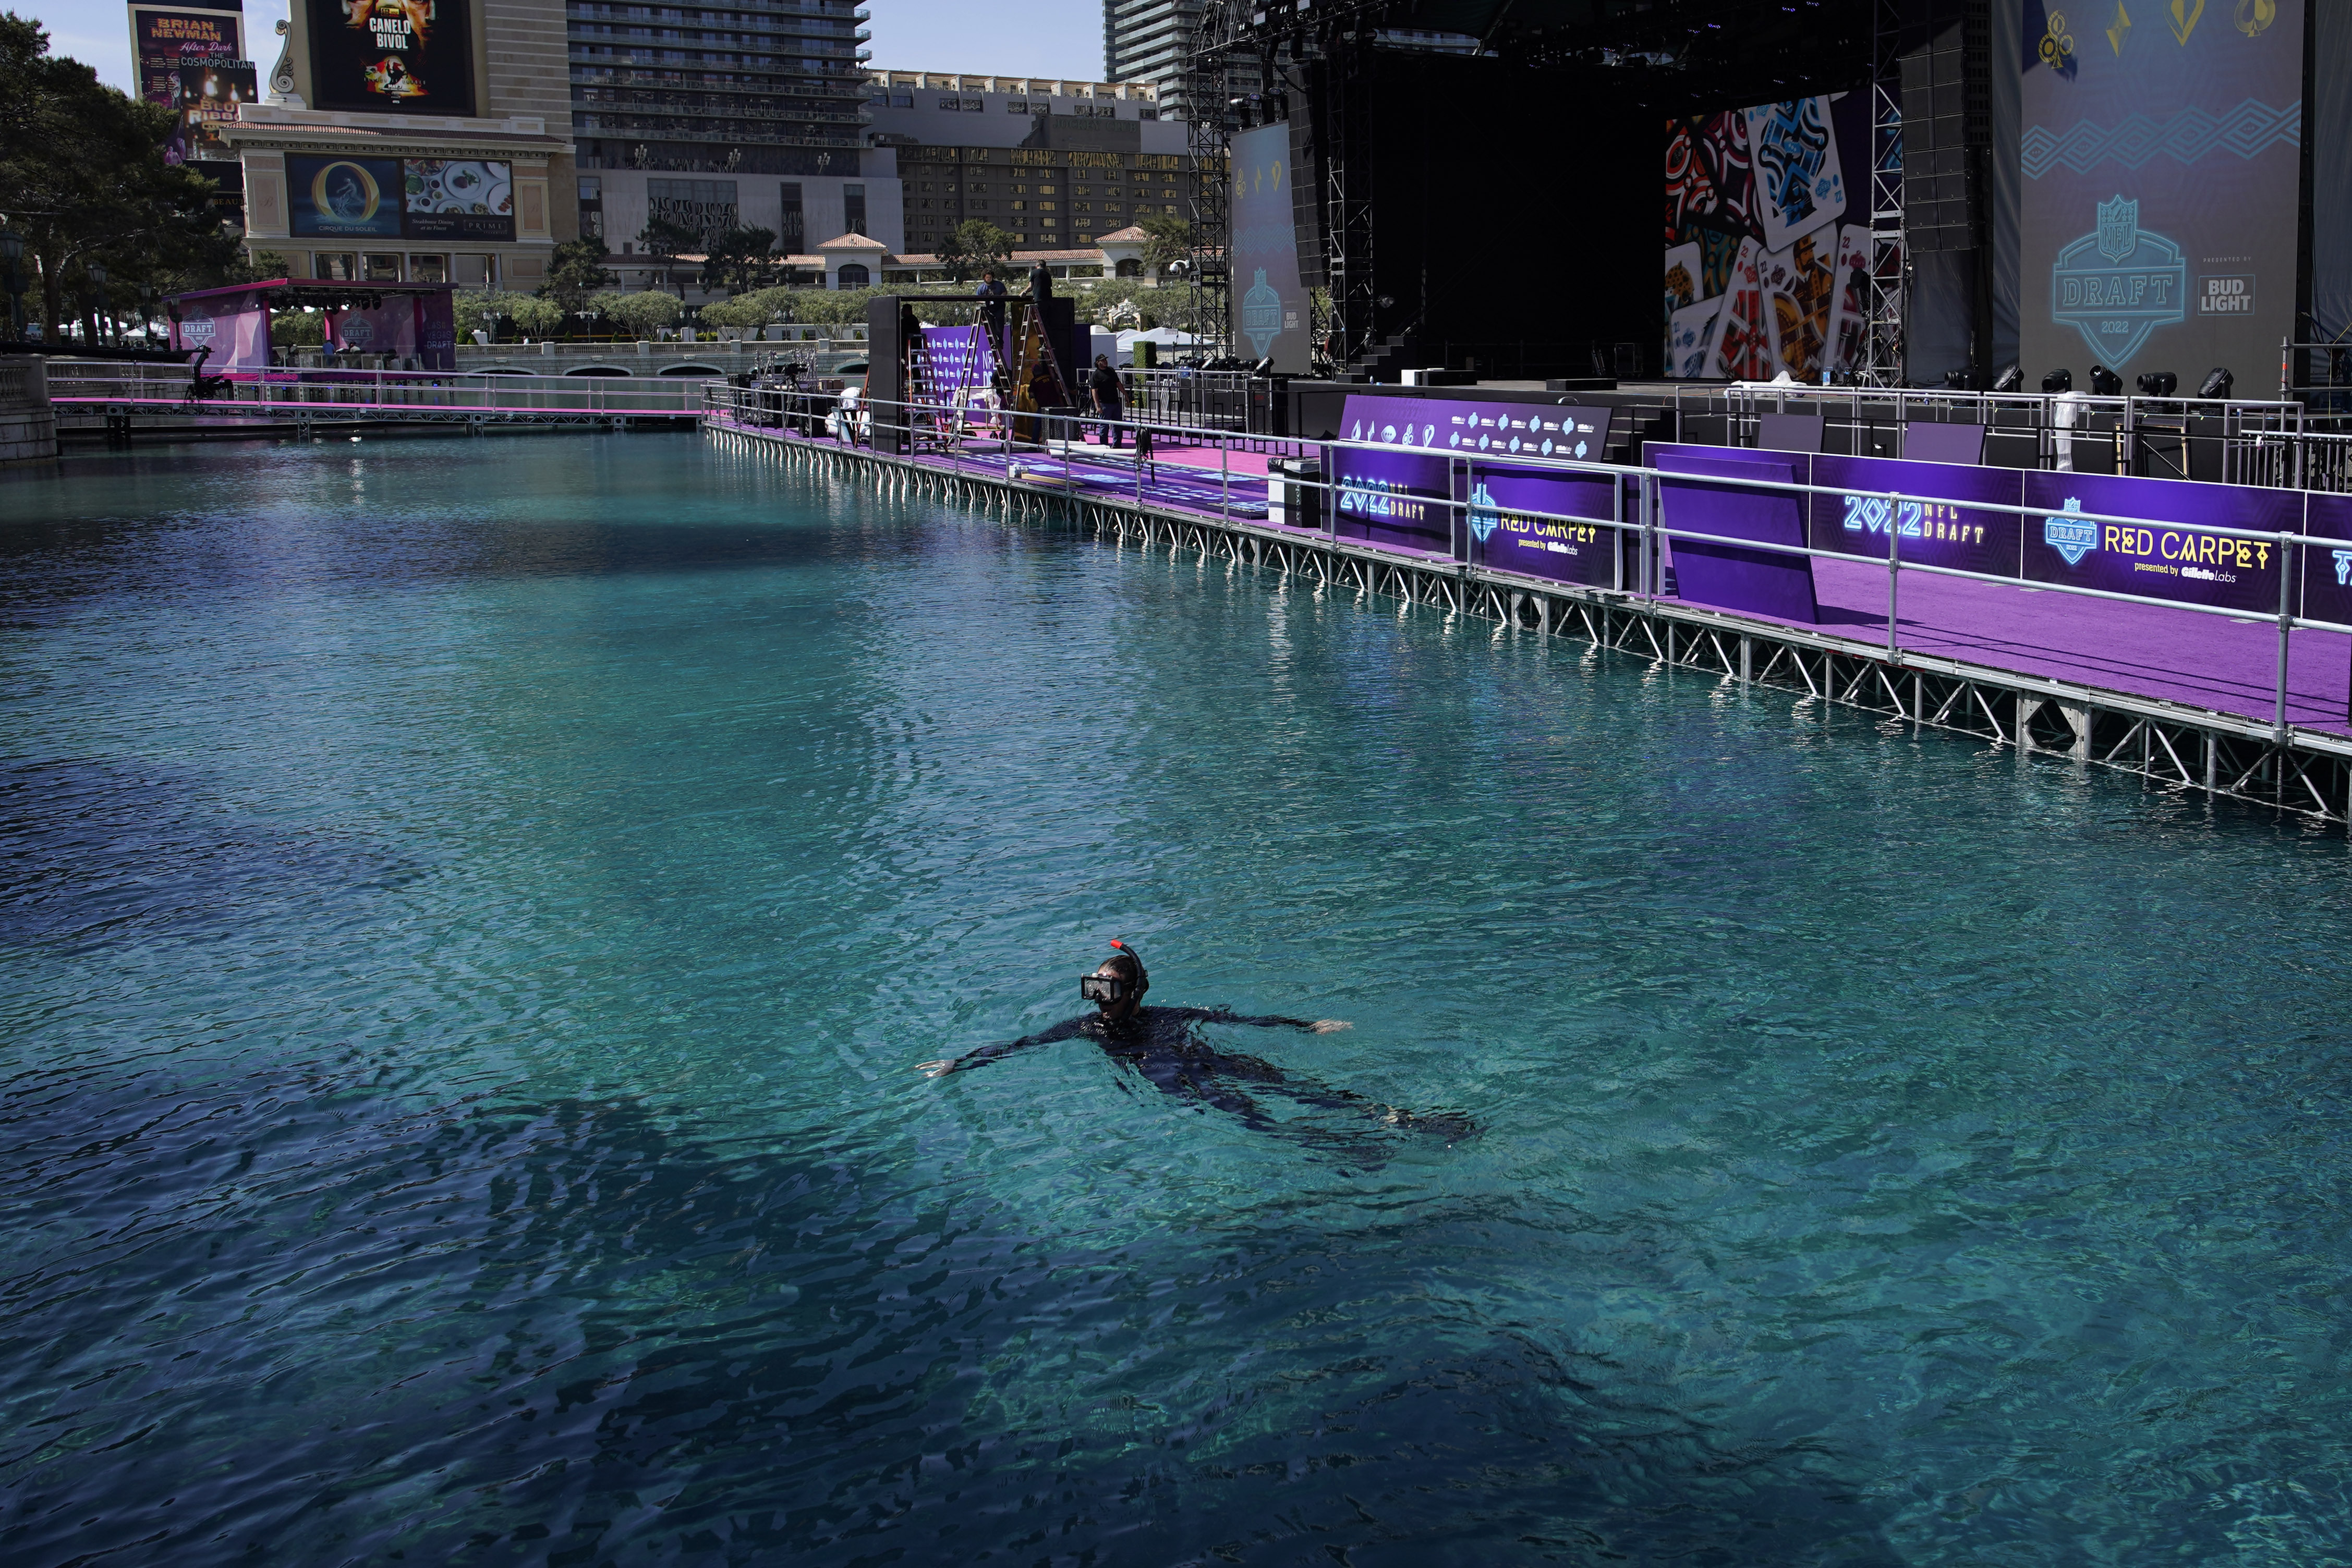 Players At The 2020 NFL Draft Will Need A Boat To Get Taken To A Stage In  The Middle Of The Bellagio Fountains For The Red Carpet - BroBible